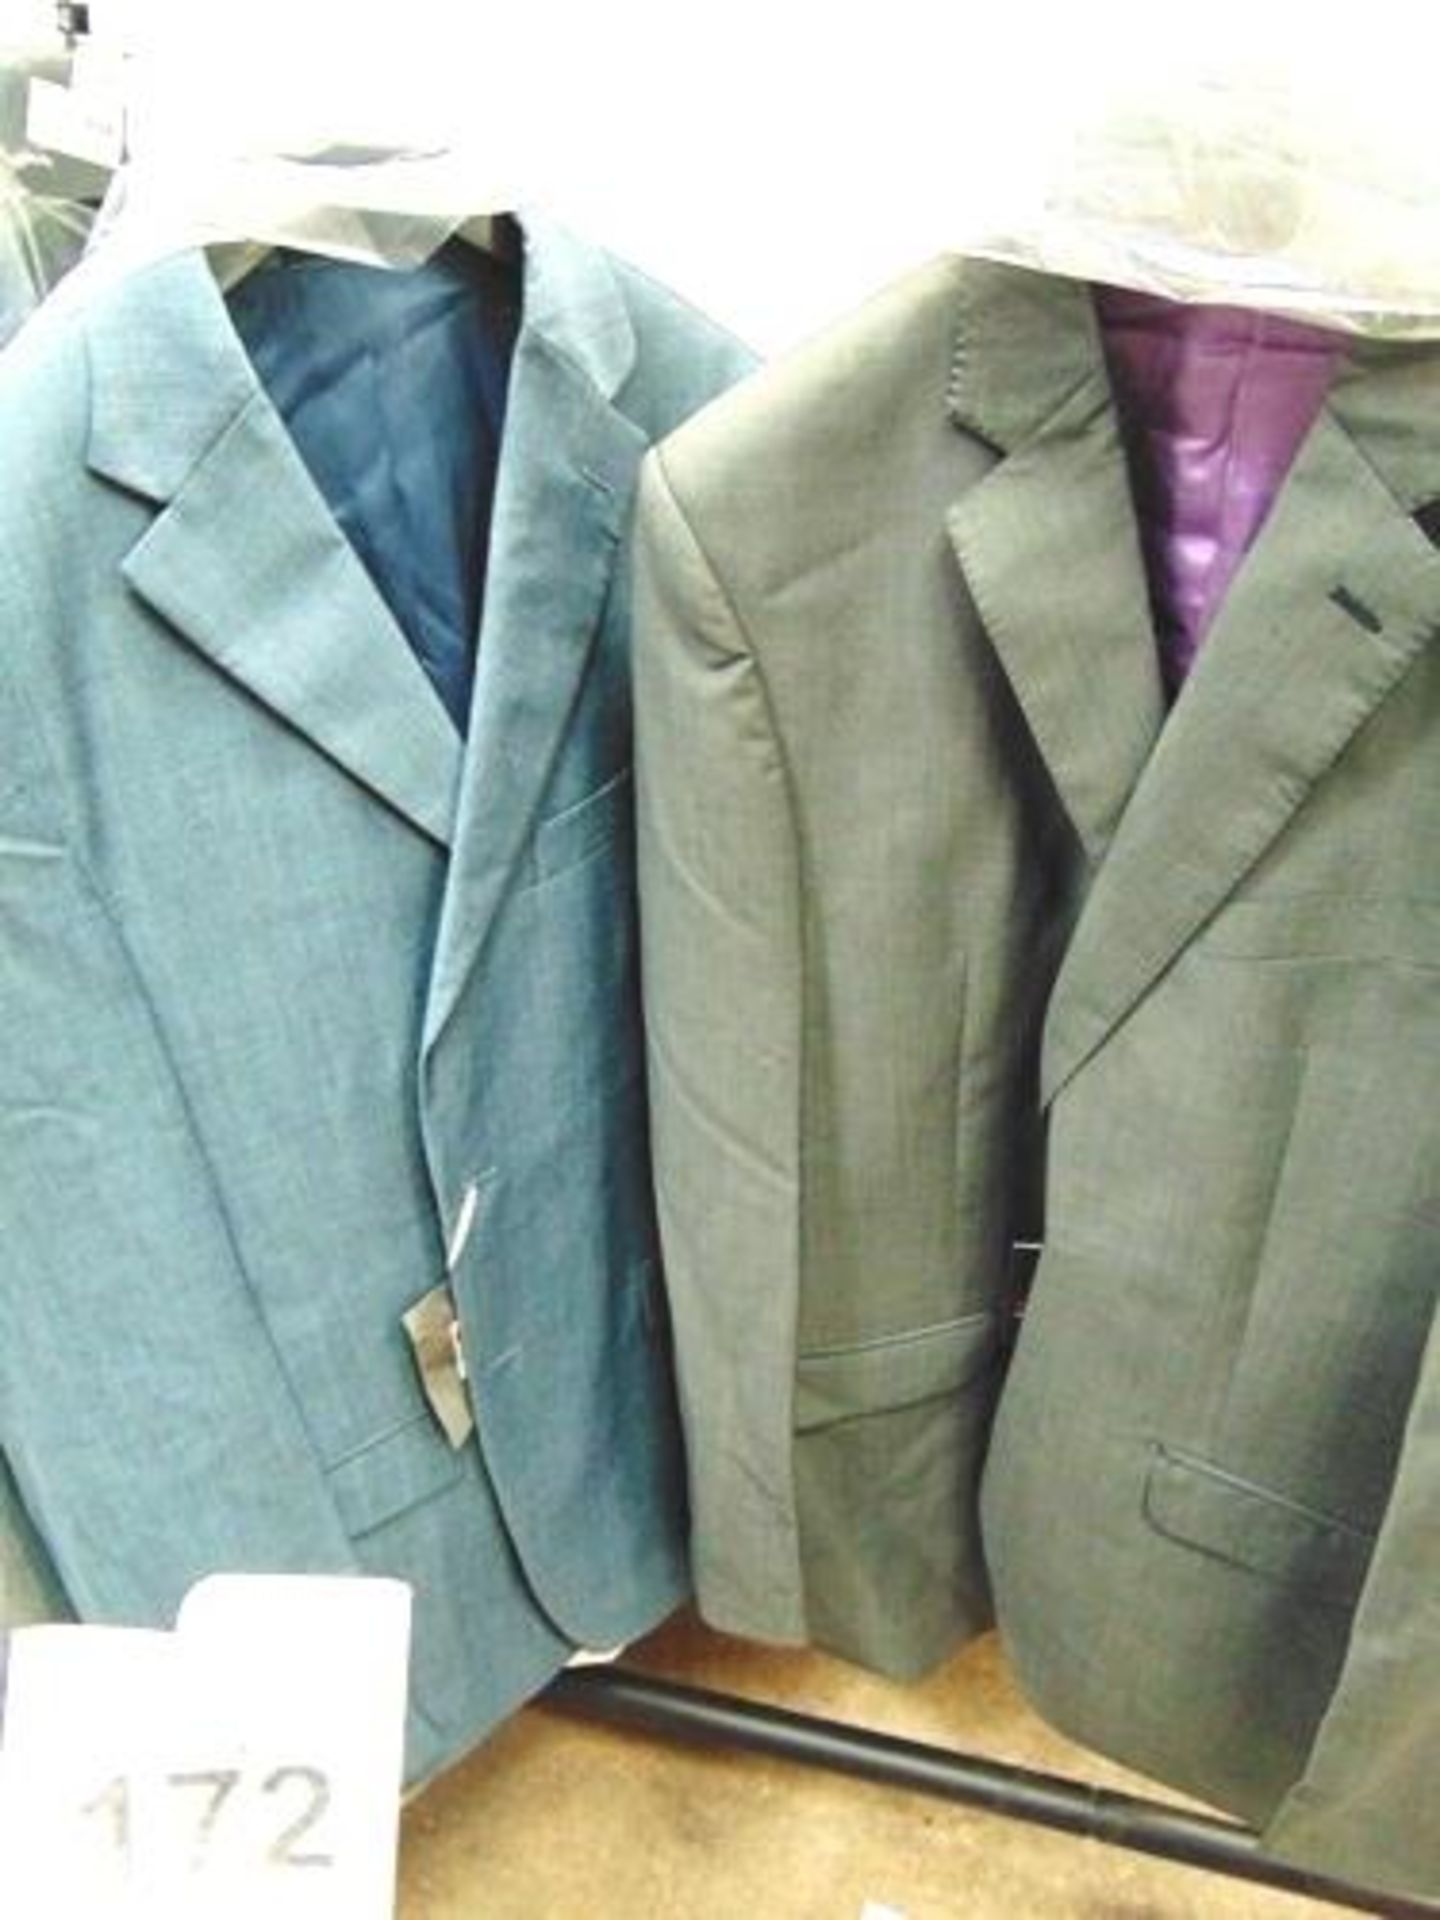 5 x John Lewis mohair suit jackets, 4 x blue and 1 x Mayfair grey, size 38 - 44- New (ESB10B) - Image 2 of 2